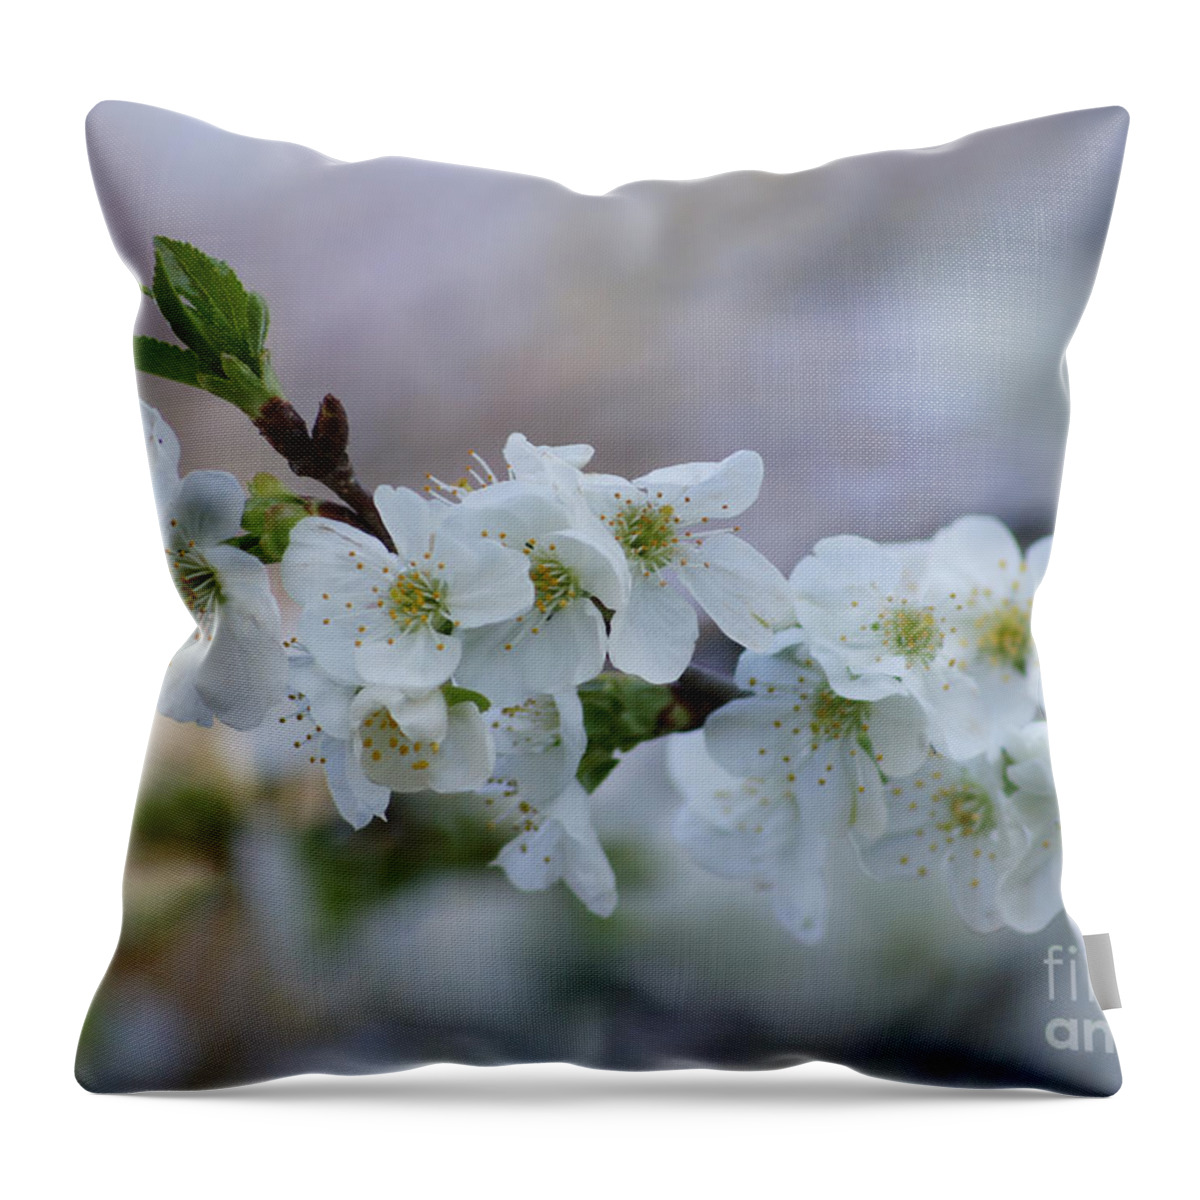 Cherry Blossoms Throw Pillow featuring the photograph Cherry Blossoms 1 by Robert E Alter Reflections of Infinity